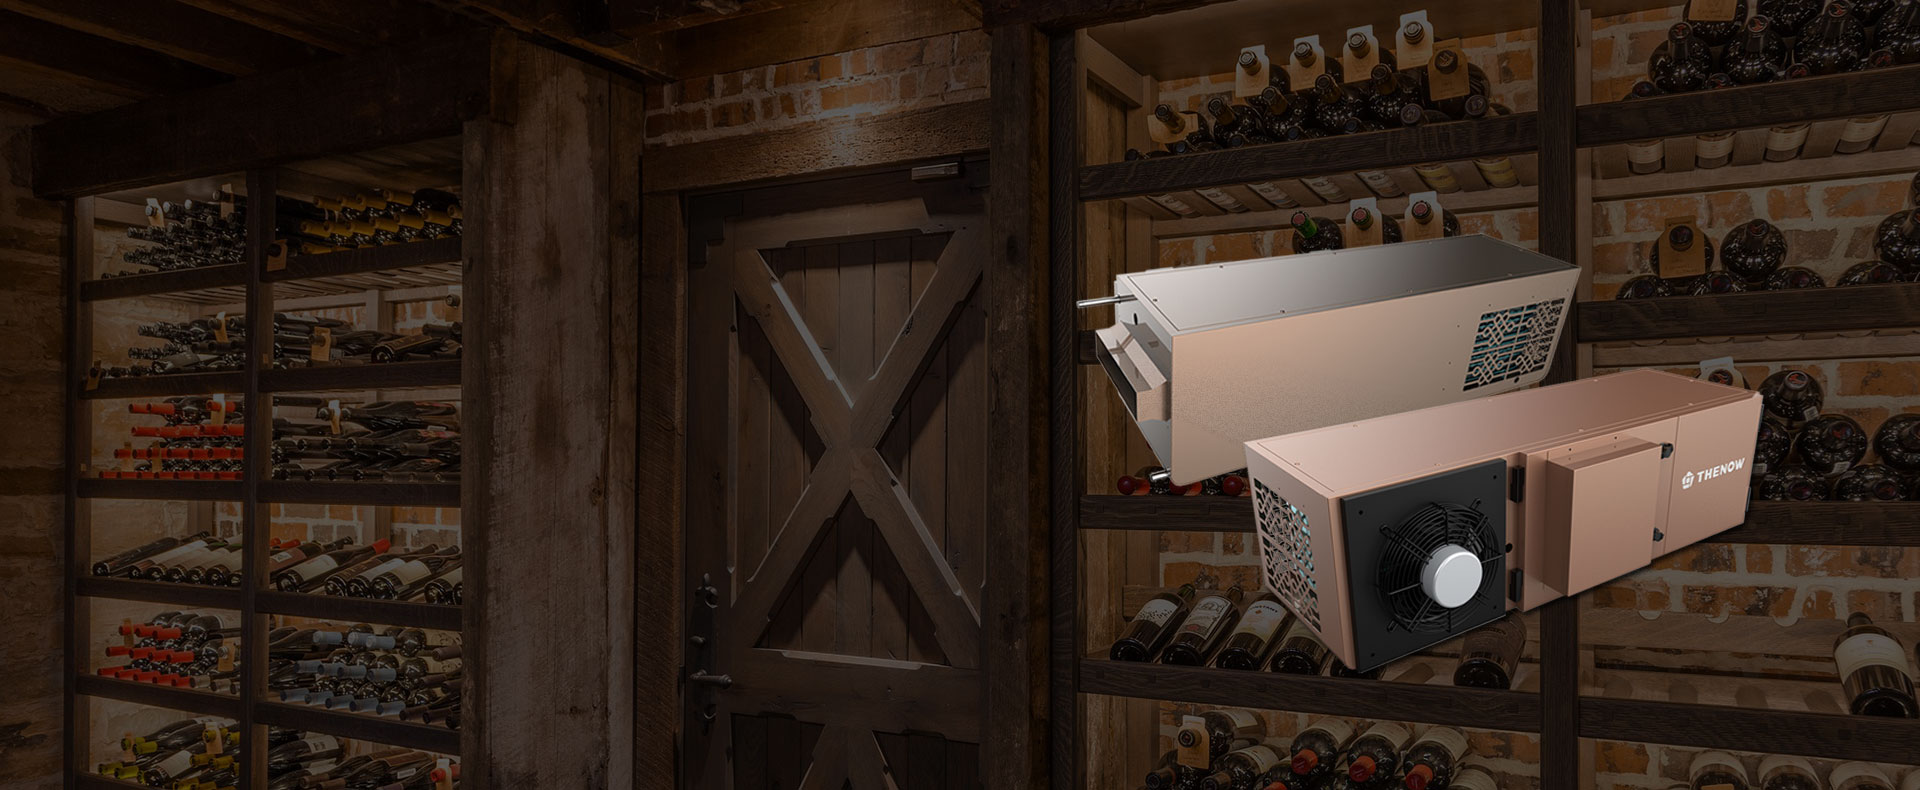 Wine Cellar Climate Control, Self-contained